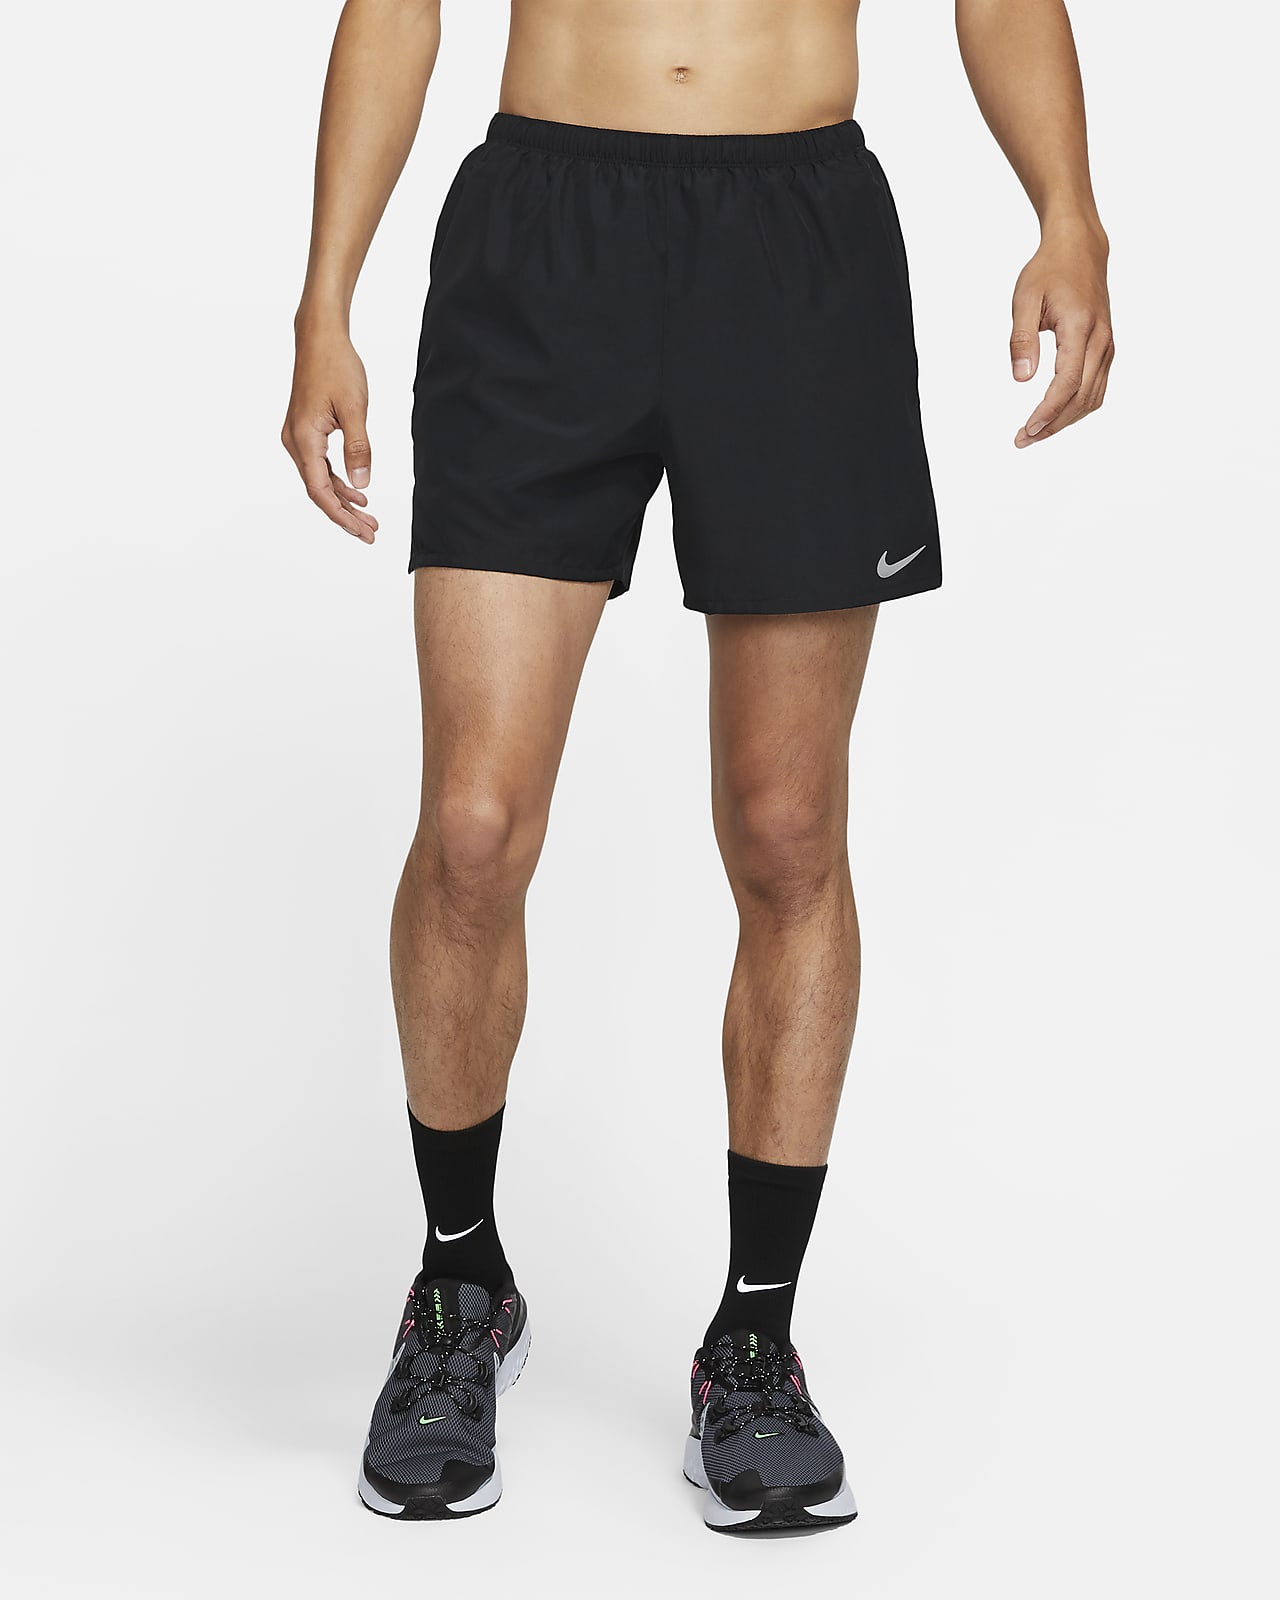 Brief-Lined Running Shorts. Nike ID